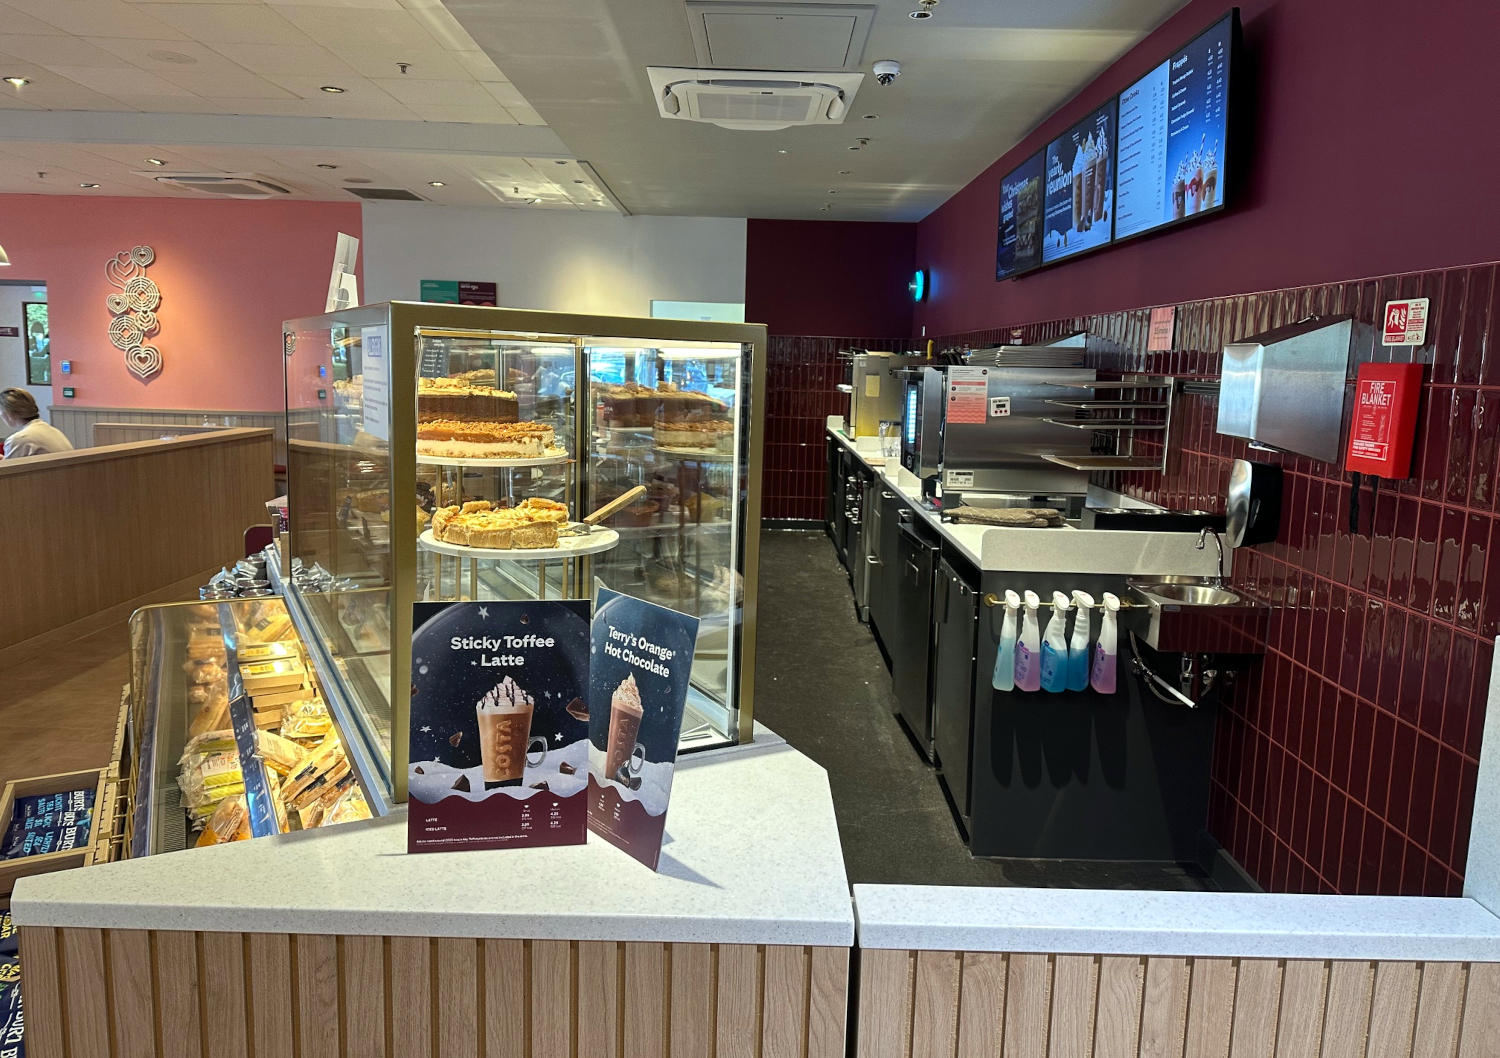 Costa coffee shop Chichester, West Sussex, ready to open. Photo by A.Howse